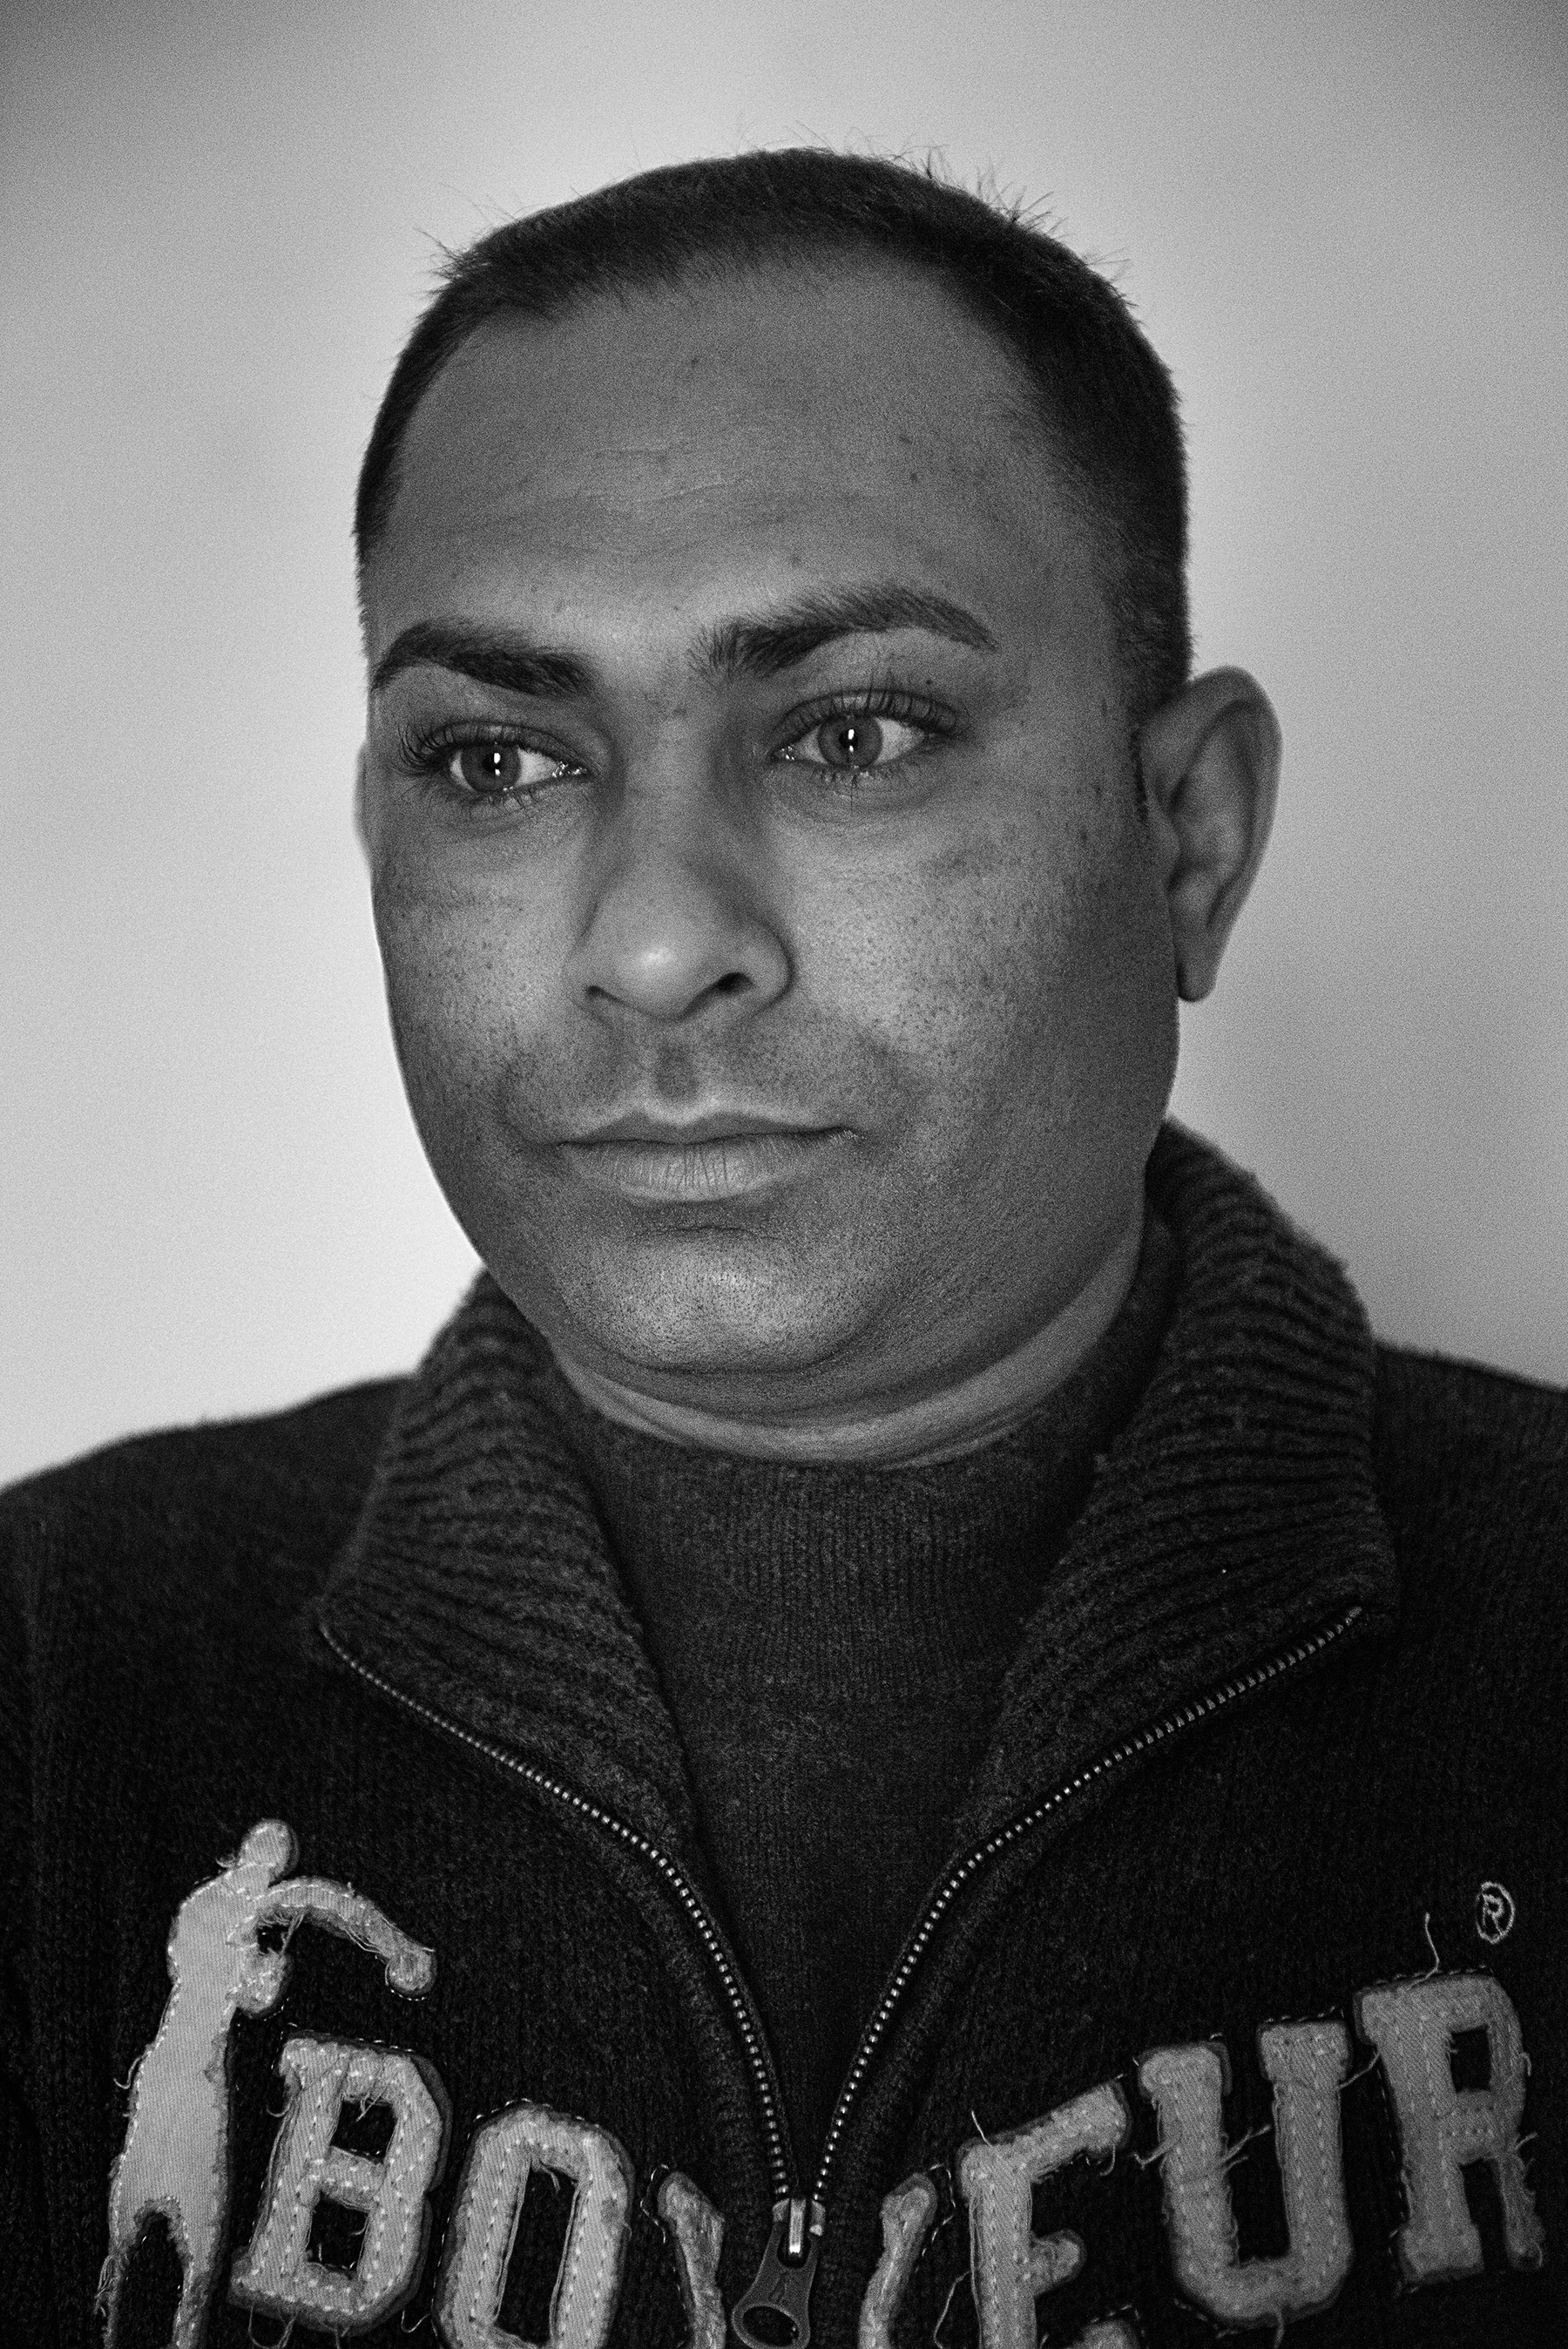  Gurpreet Dhindsa (38) portrayed inside his former house in the working class district of San Salvario in Turin, Italy; November 2018.
Mr. Dhindsa lived for 2 years in a small overcrowded apartment – from time to time, even 10 people in a single room